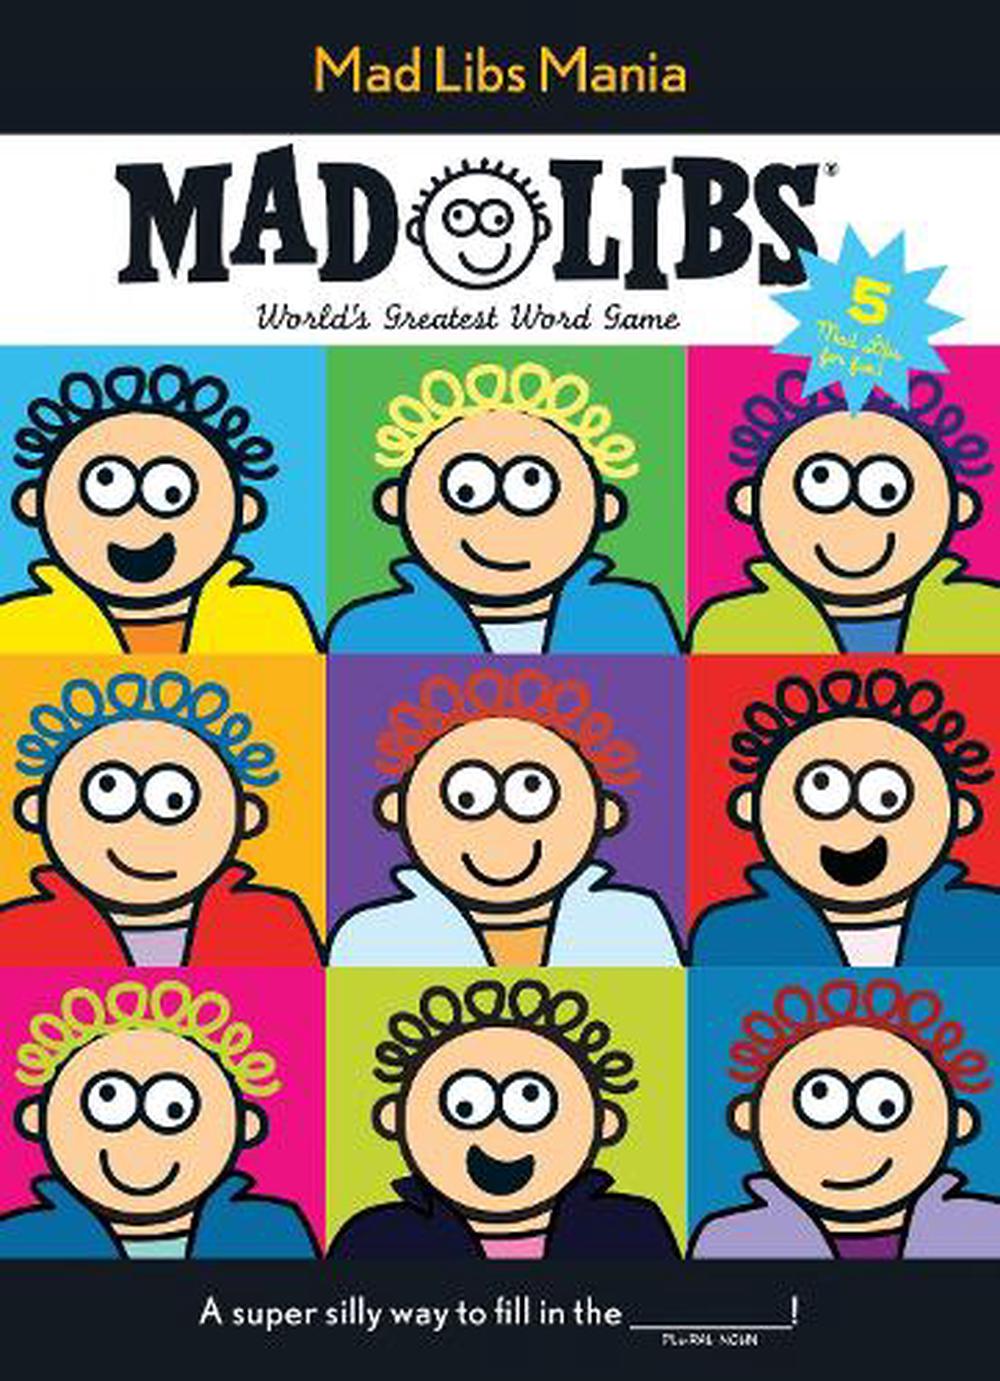 Mad Libs Mania by Mad Libs, Paperback, 9780843182897 | Buy online at ...